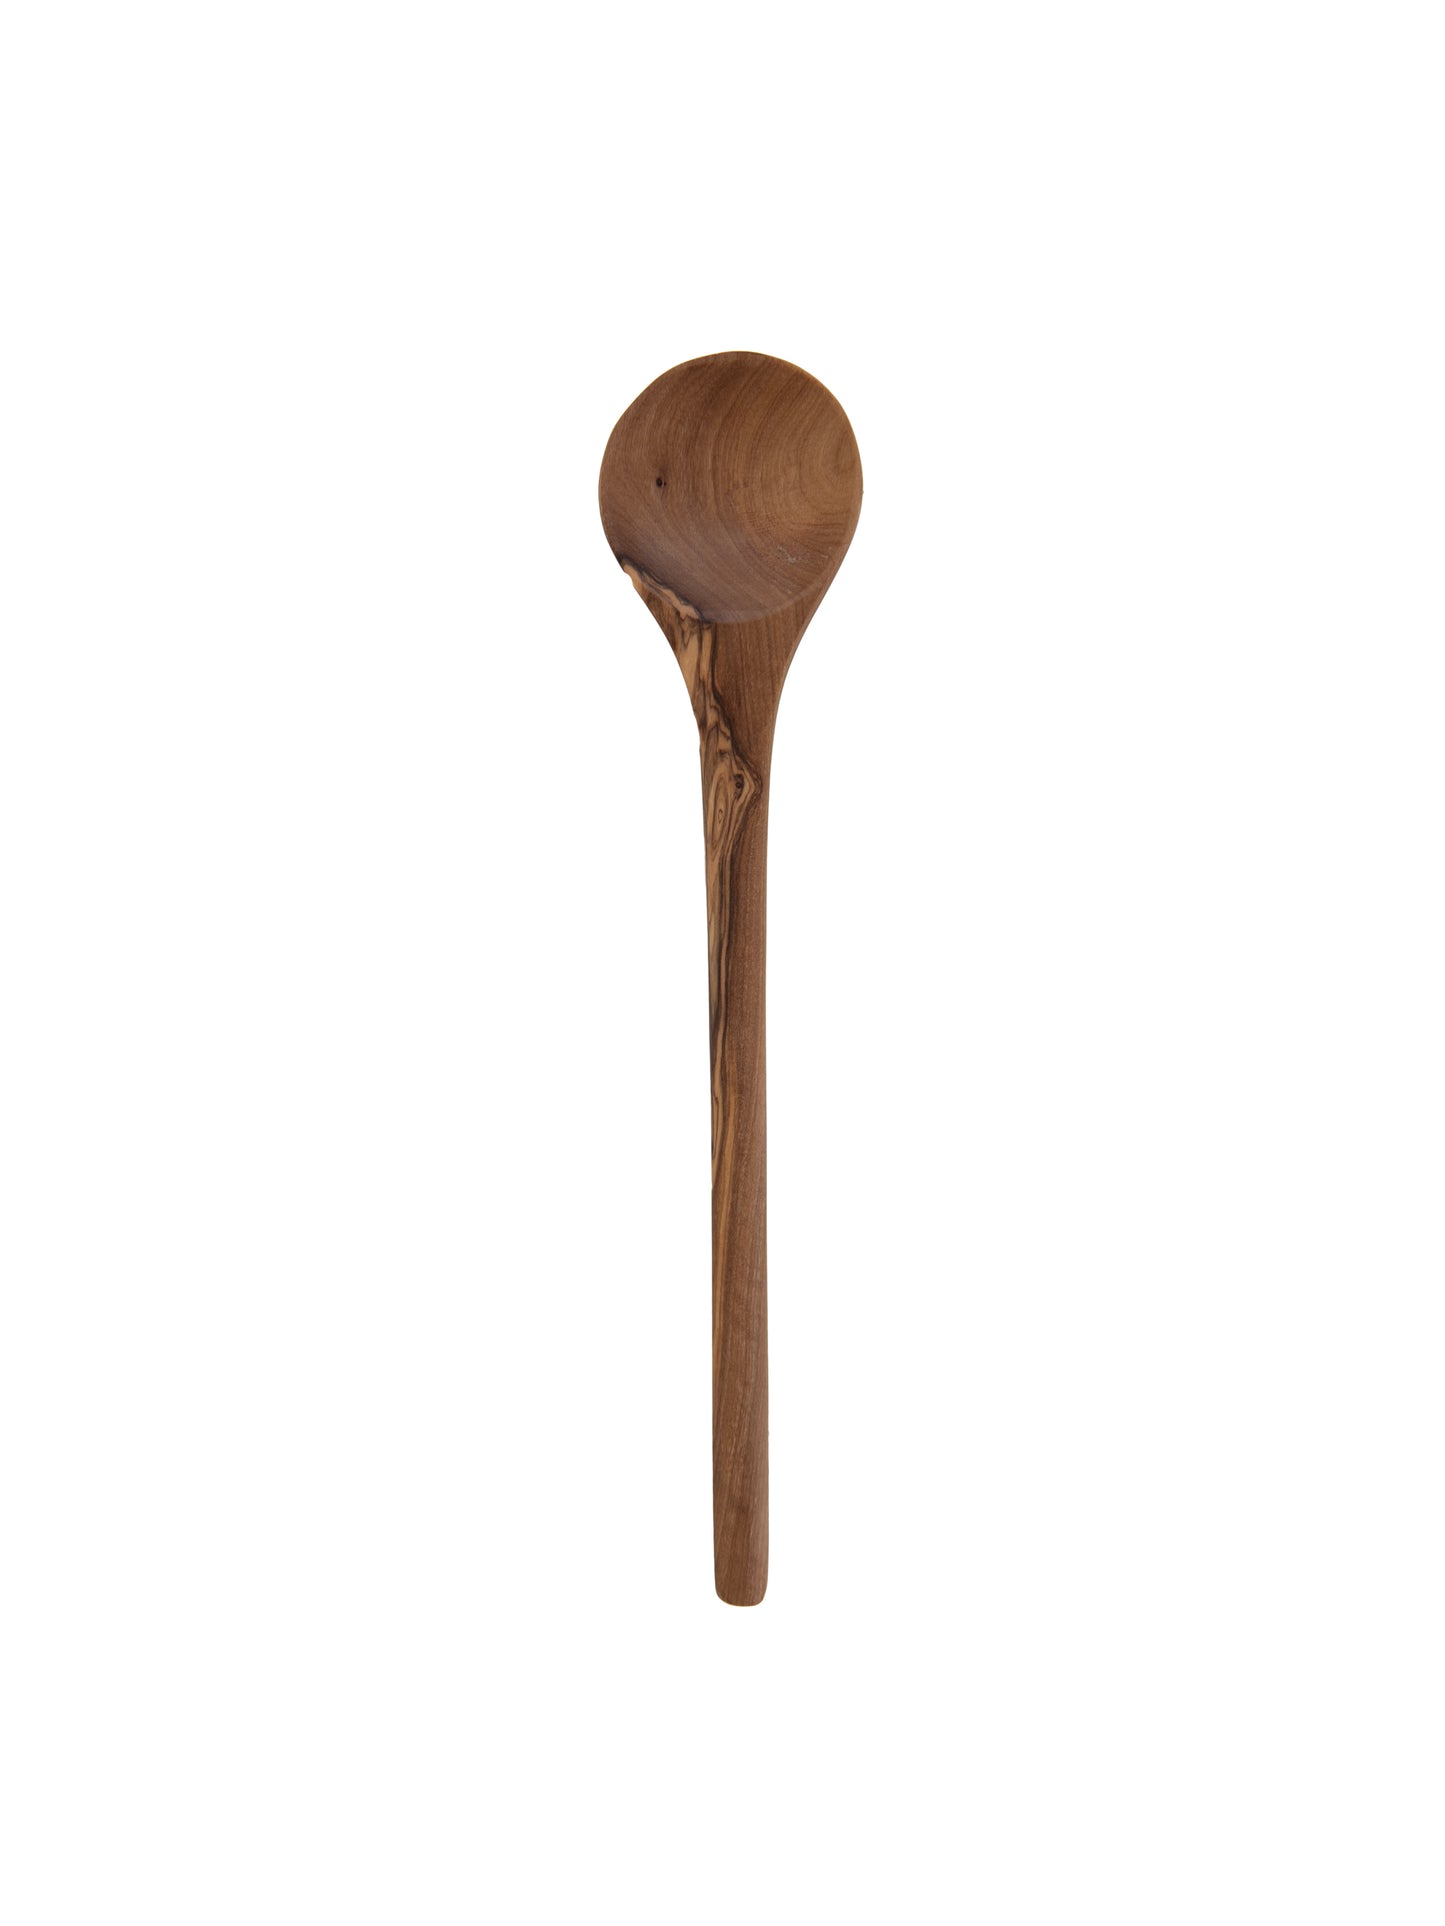 WT Olive Wood Cooking Spoon 12" Weston Table